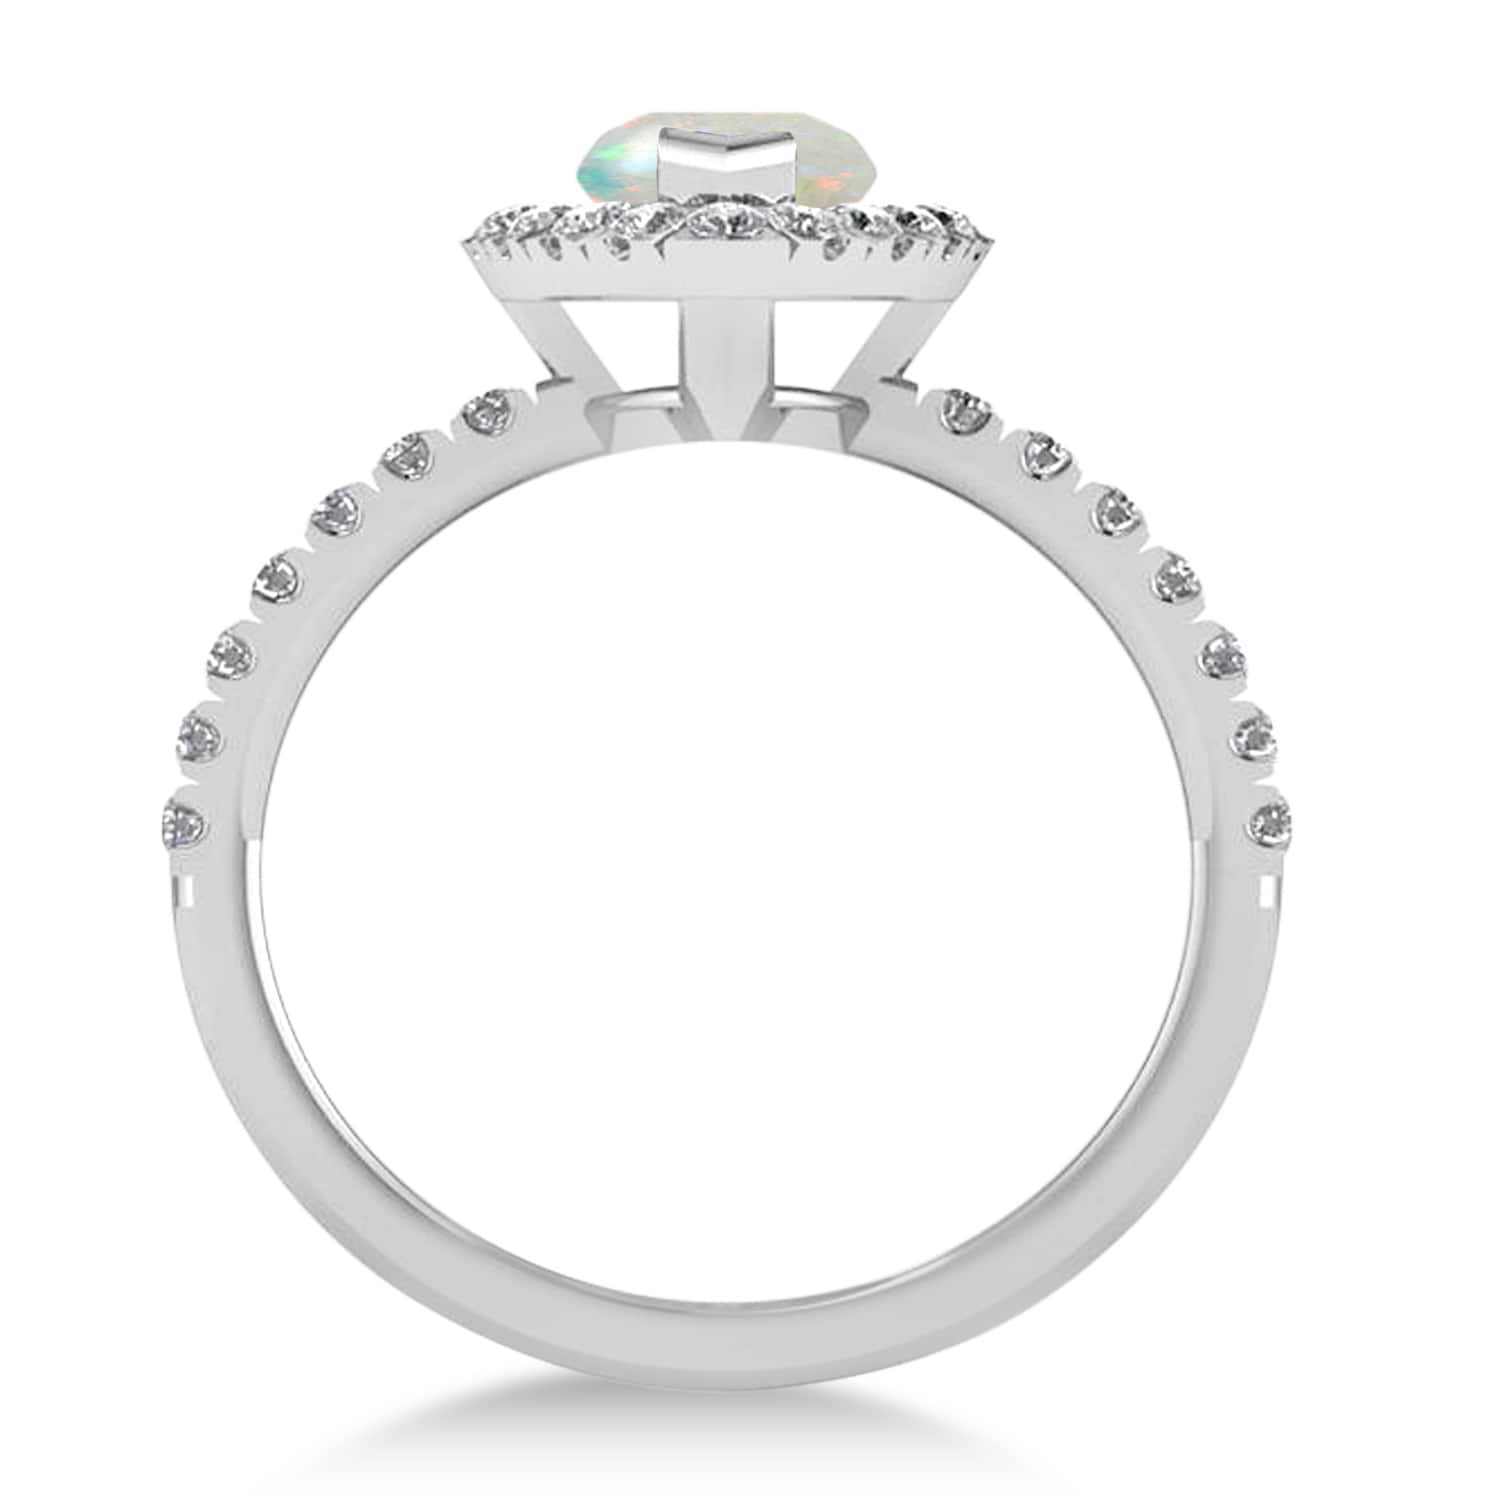 Opal & Diamond Marquise Halo Engagement Ring 14k White Gold (1.84ct)